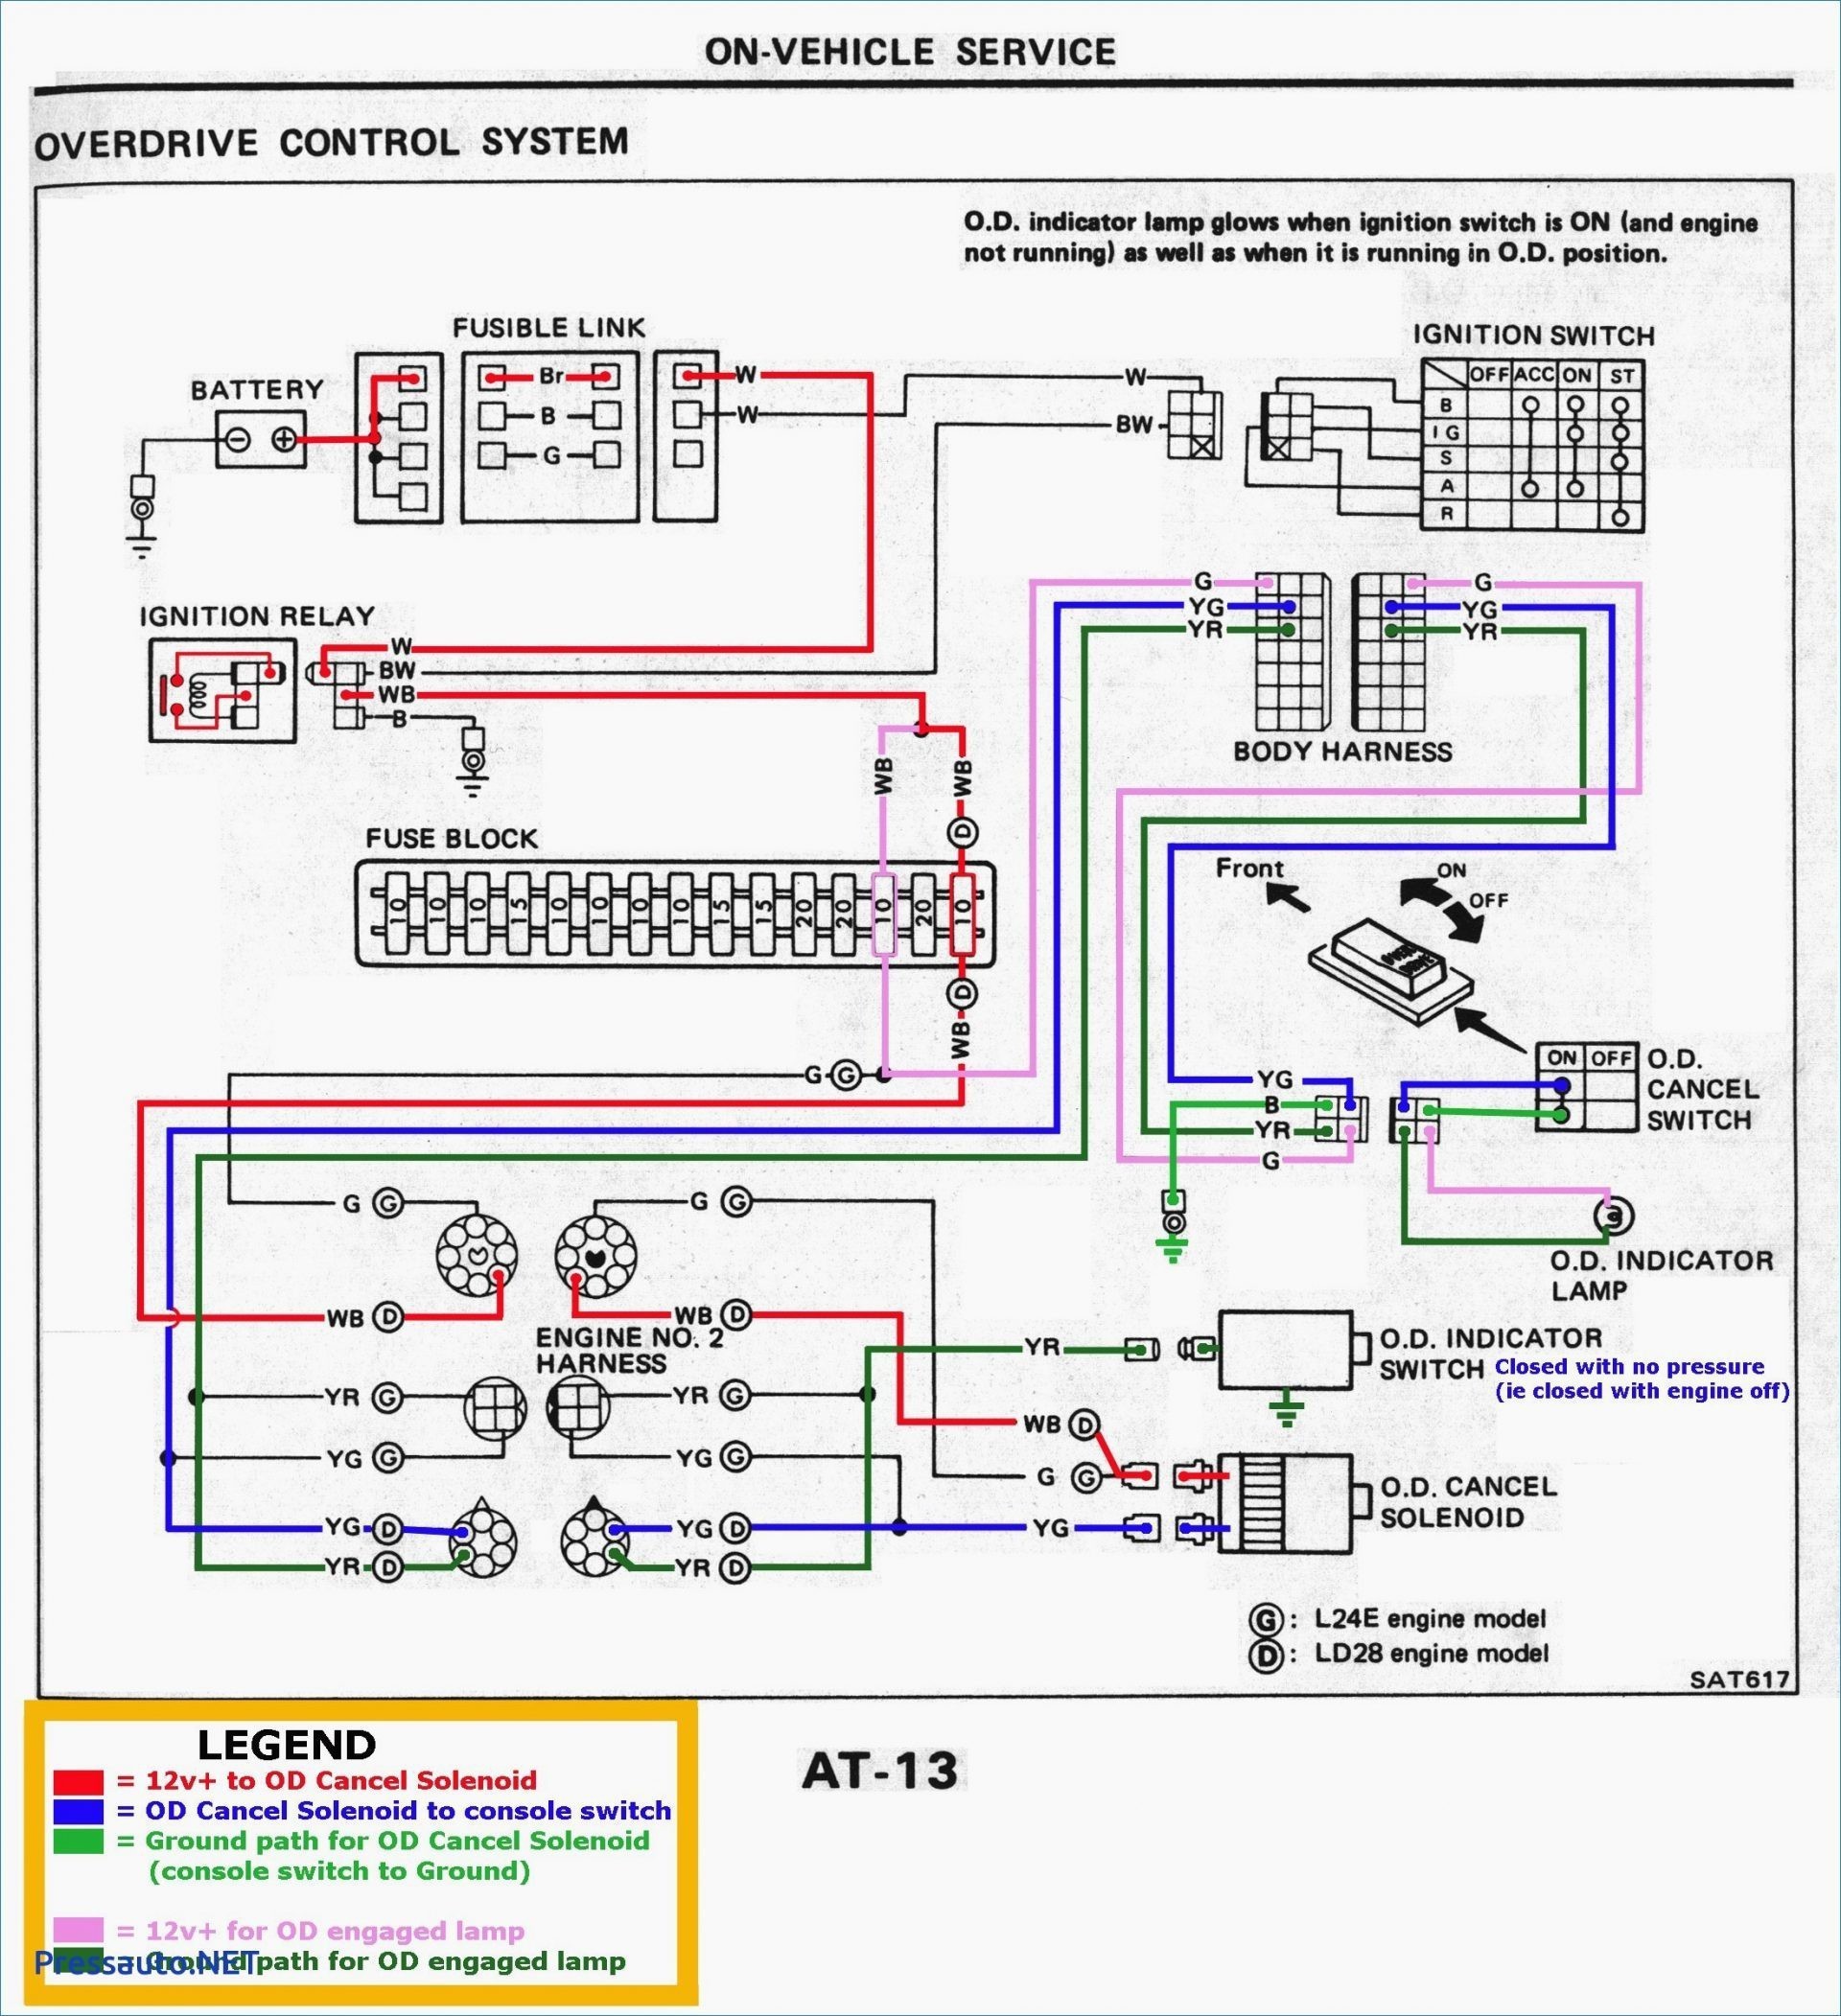 Utility Trailer Wiring Diagram New Wiring Diagram for tow Lights Best Automotive Trailer Wiring Diagram